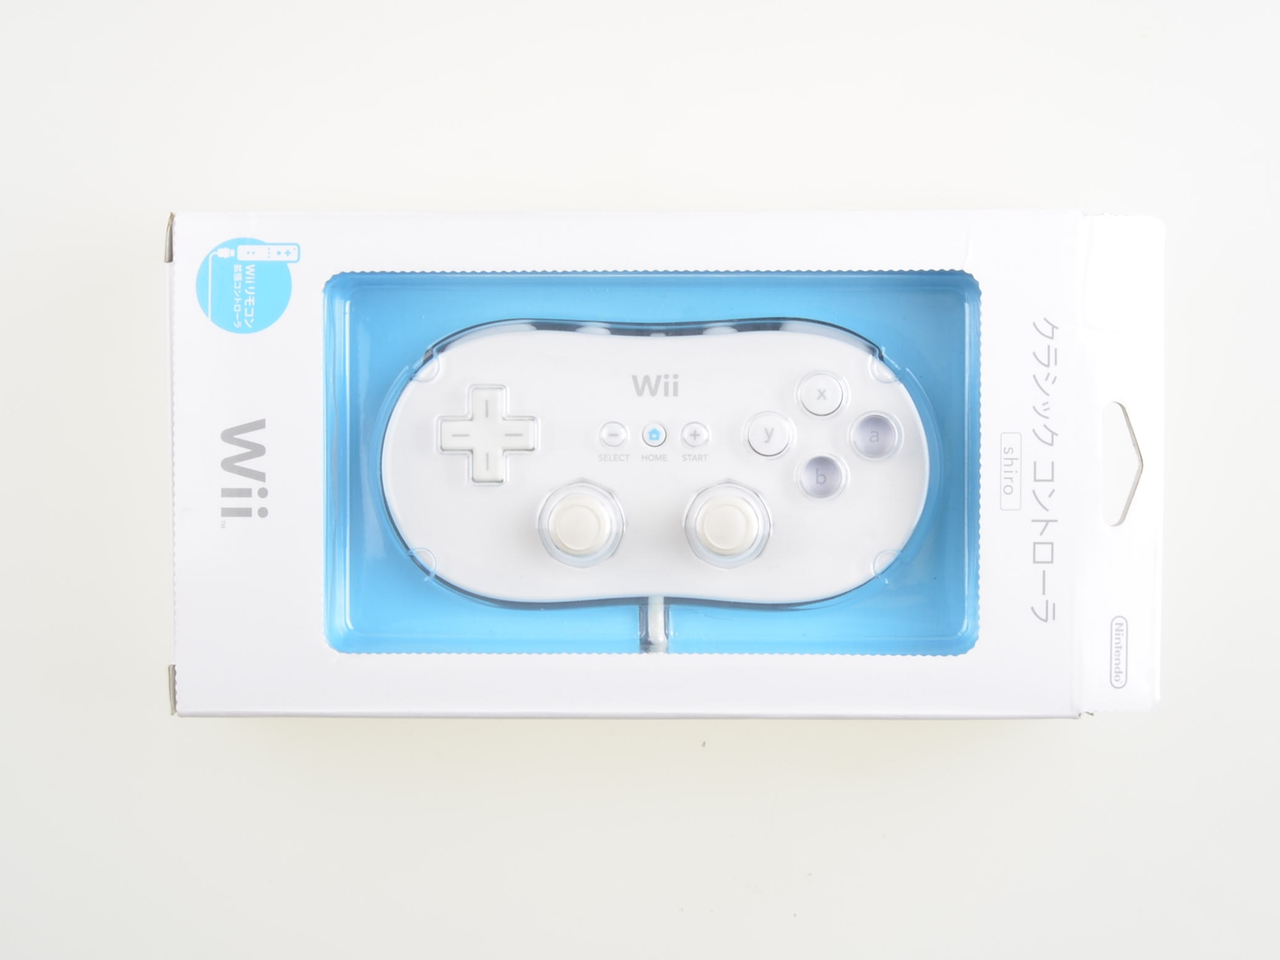 Nintendo Wii Classic Controller - White [Complete] - Wii Hardware